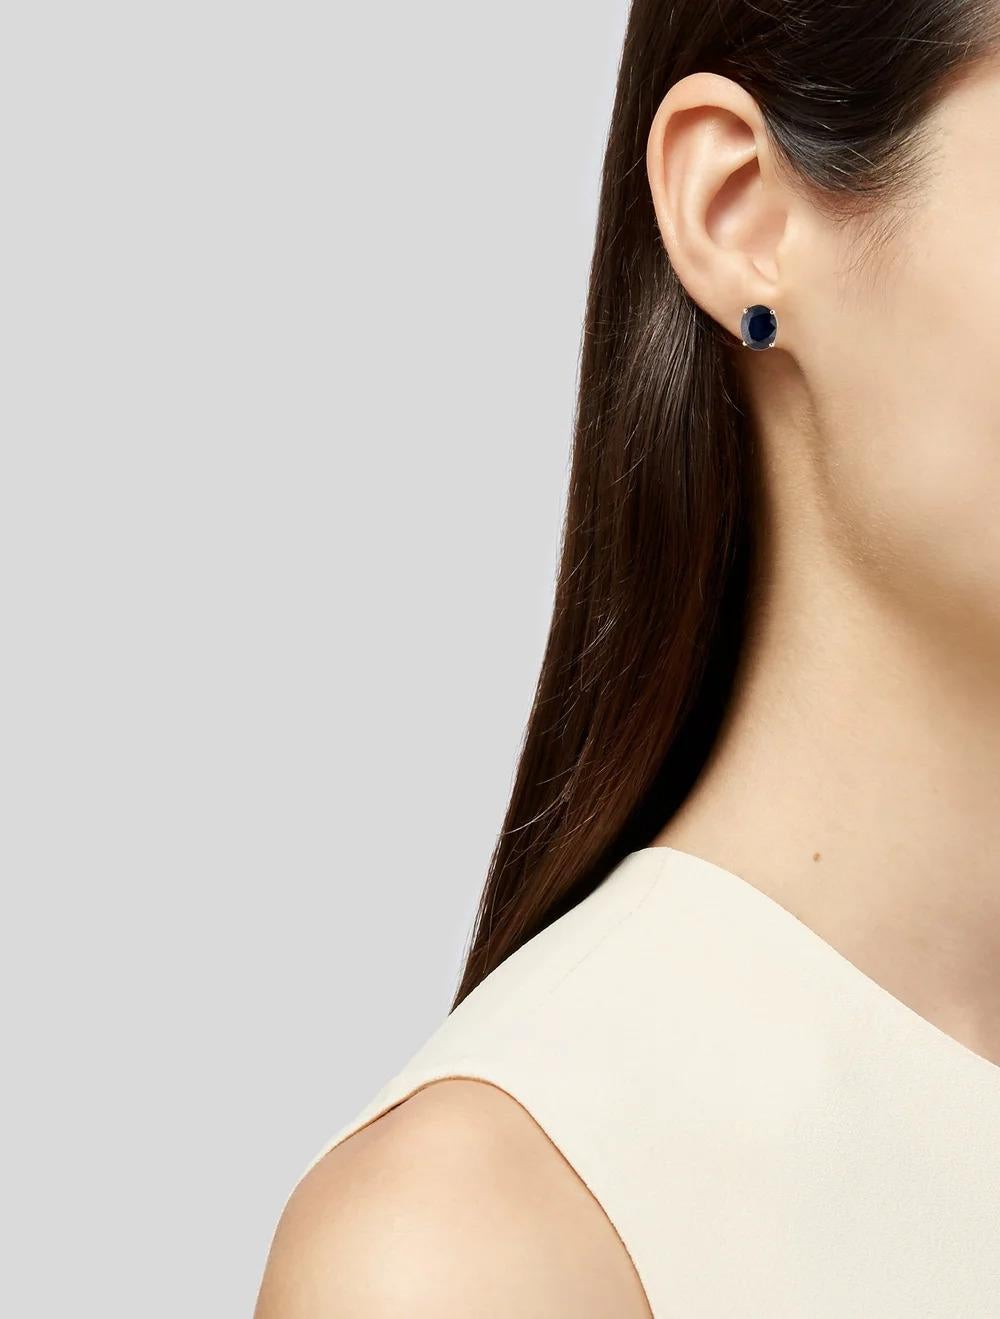 Enhance your elegance with these captivating 14K Yellow Gold Sapphire Stud Earrings, boasting a total carat weight of 6.58. Crafted to perfection, each earring features two exquisite Oval Modified Brilliant Sapphires, radiating a mesmerizing blue